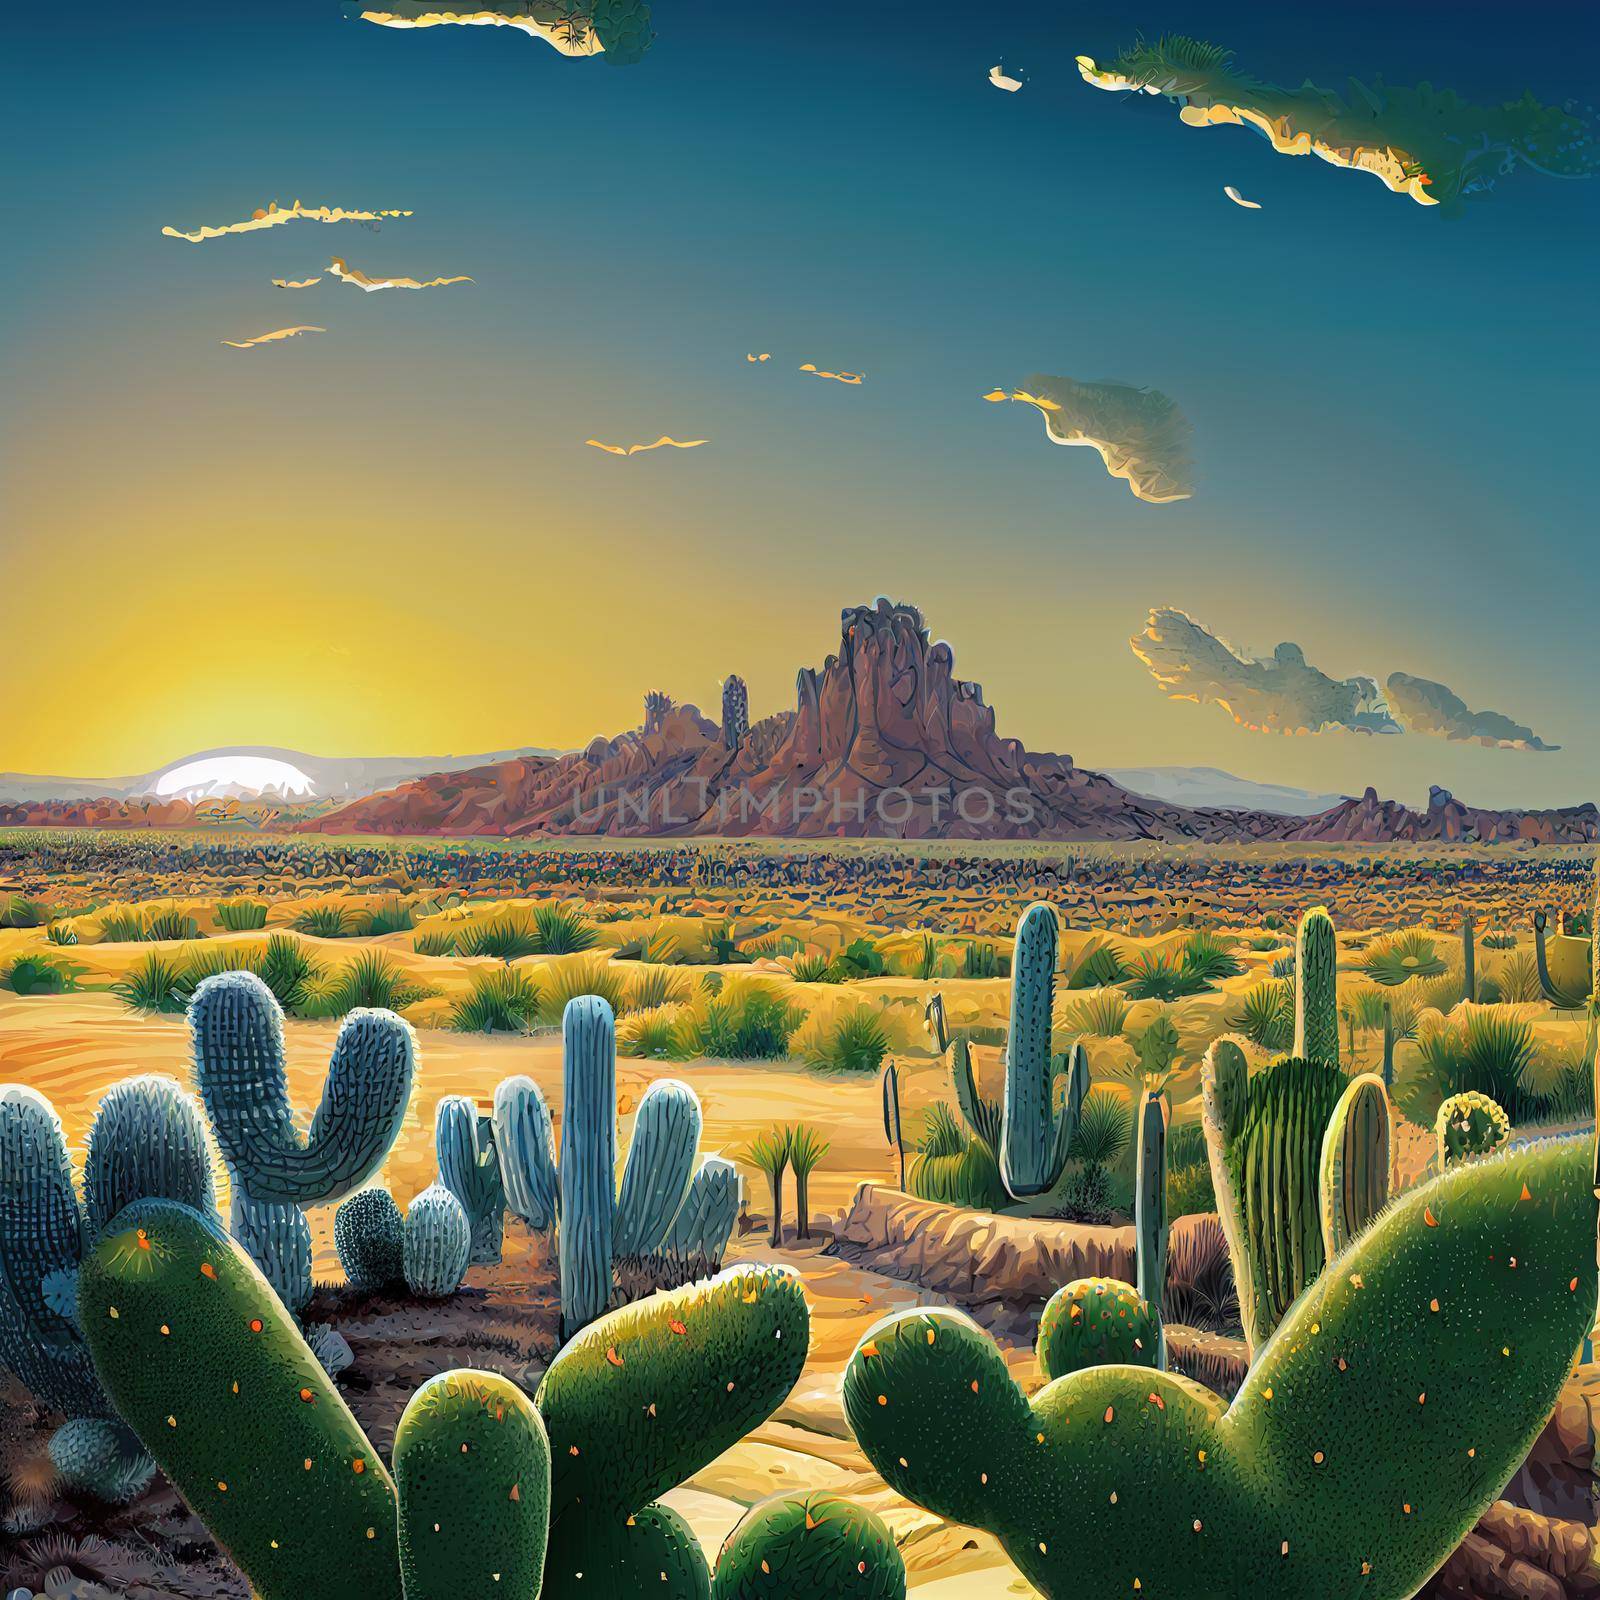 Desert and cactus landscape with sunset, cartoon style by 2ragon